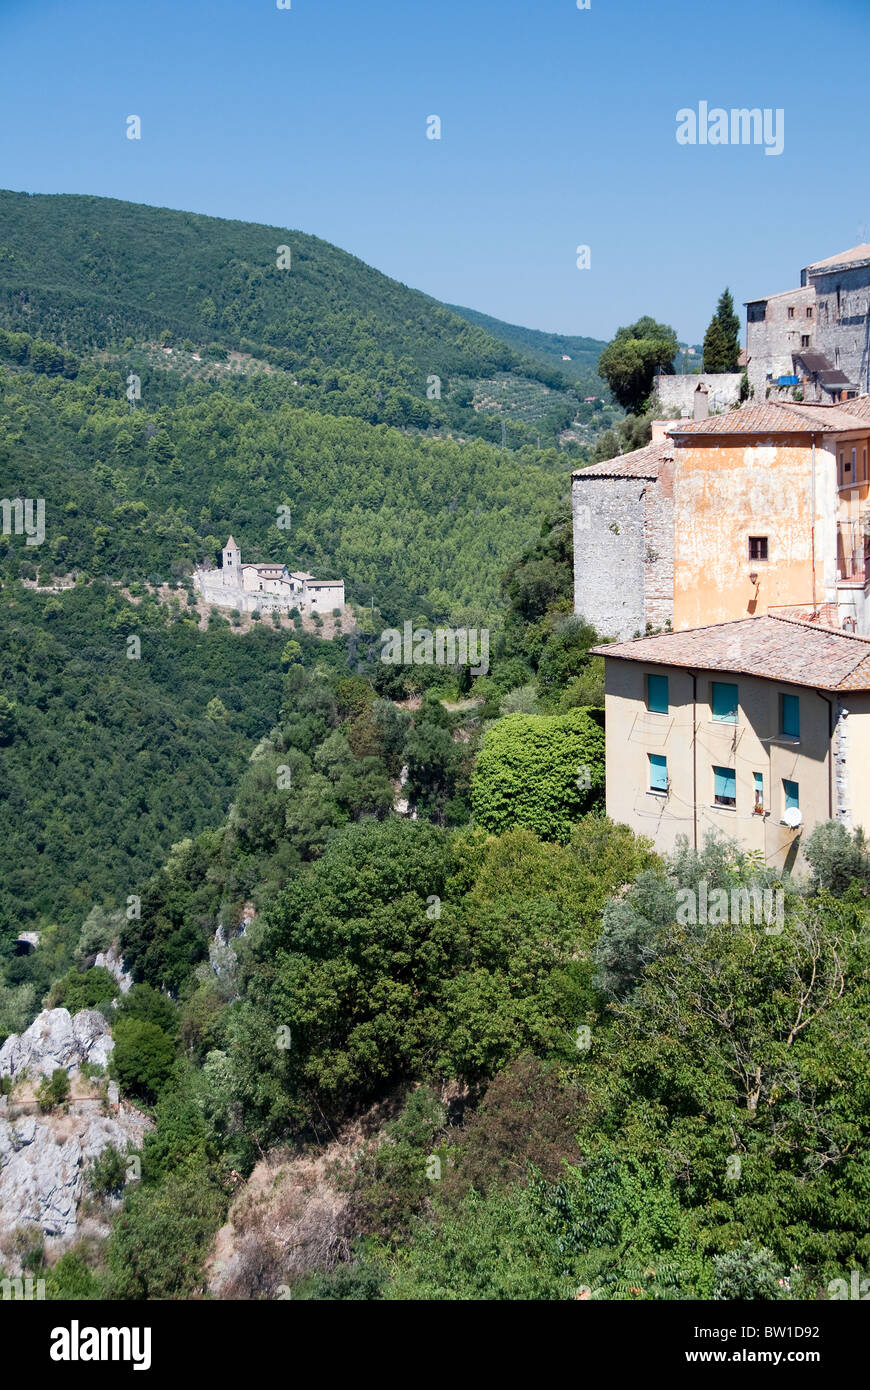 View of Umbrian hill town of Narni on the right and the Abbazia di San ...